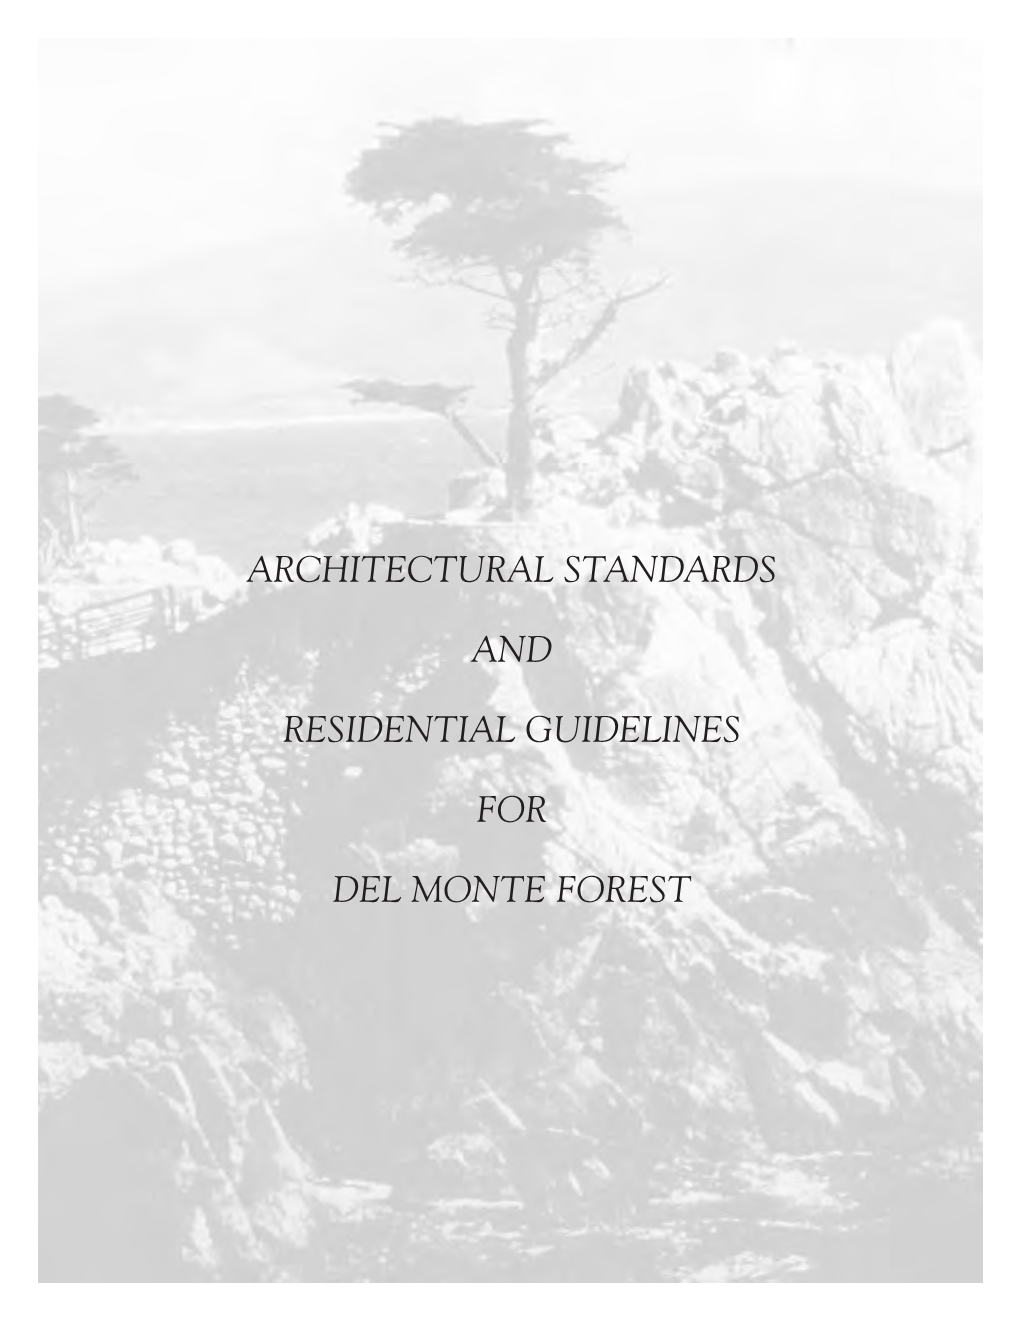 Architectural Standards and Residential Guidelines for Del Monte Forest